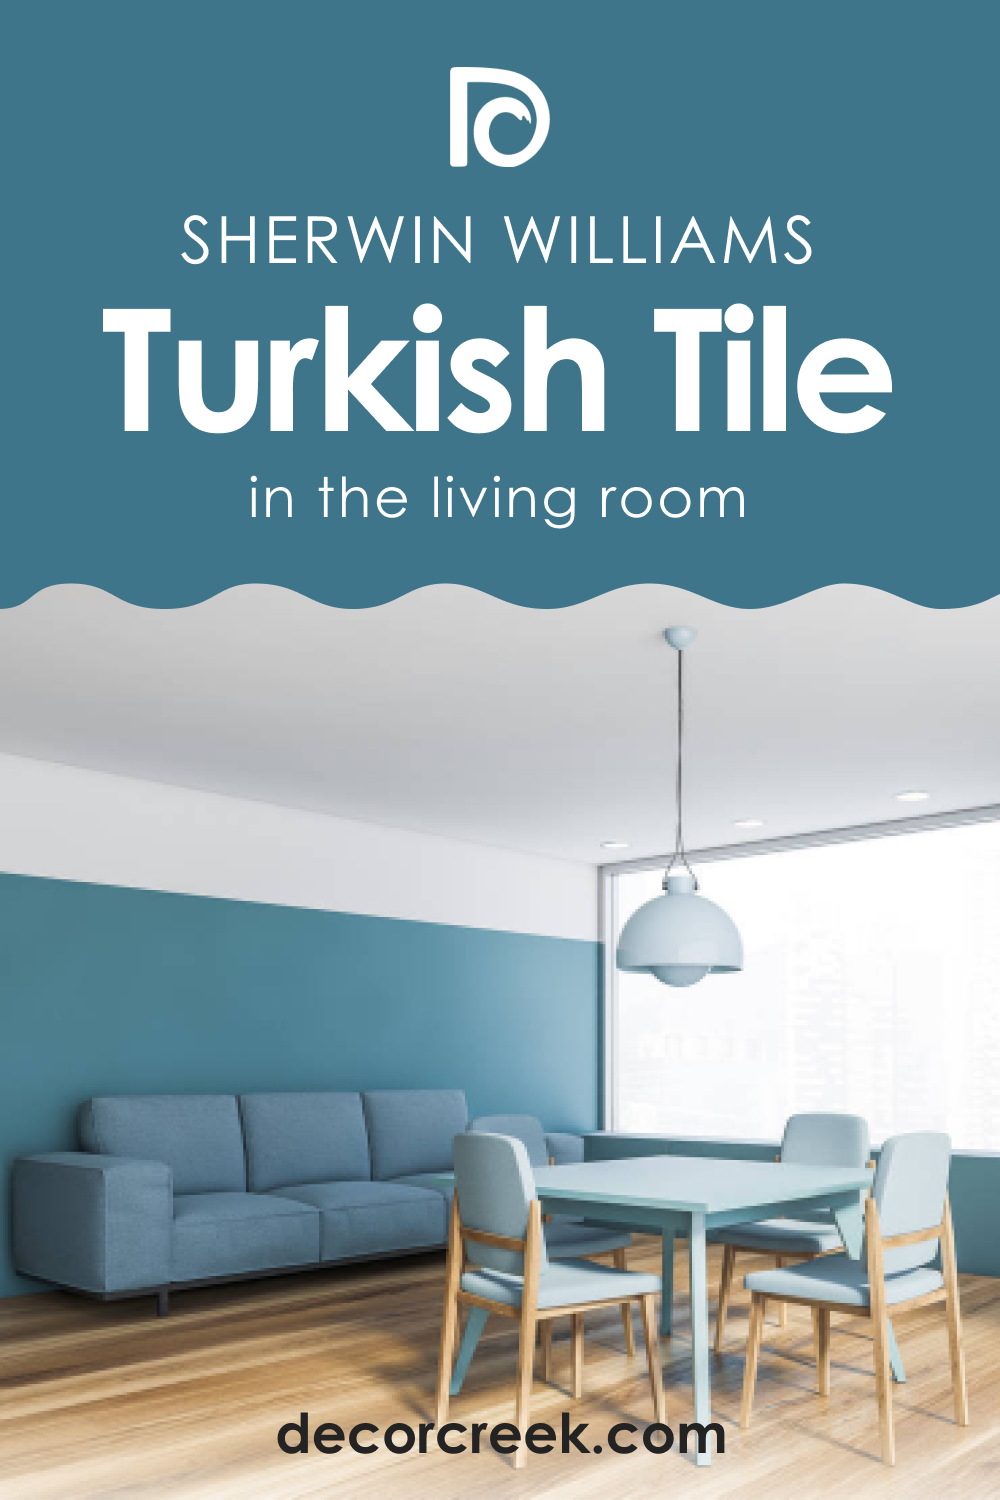 How to Use SW 7610 Turkish Tile in the Living Room?